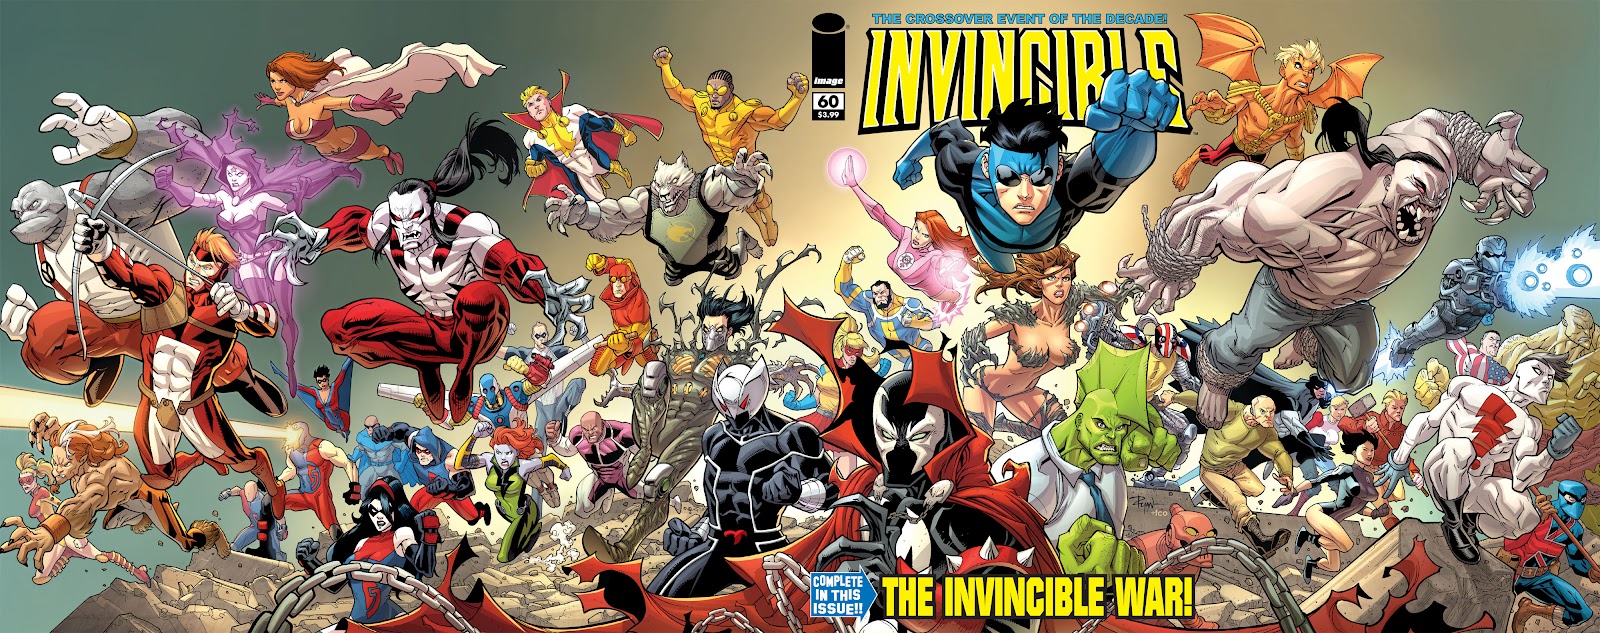 Invincible (2003) issue 60 - Page 2